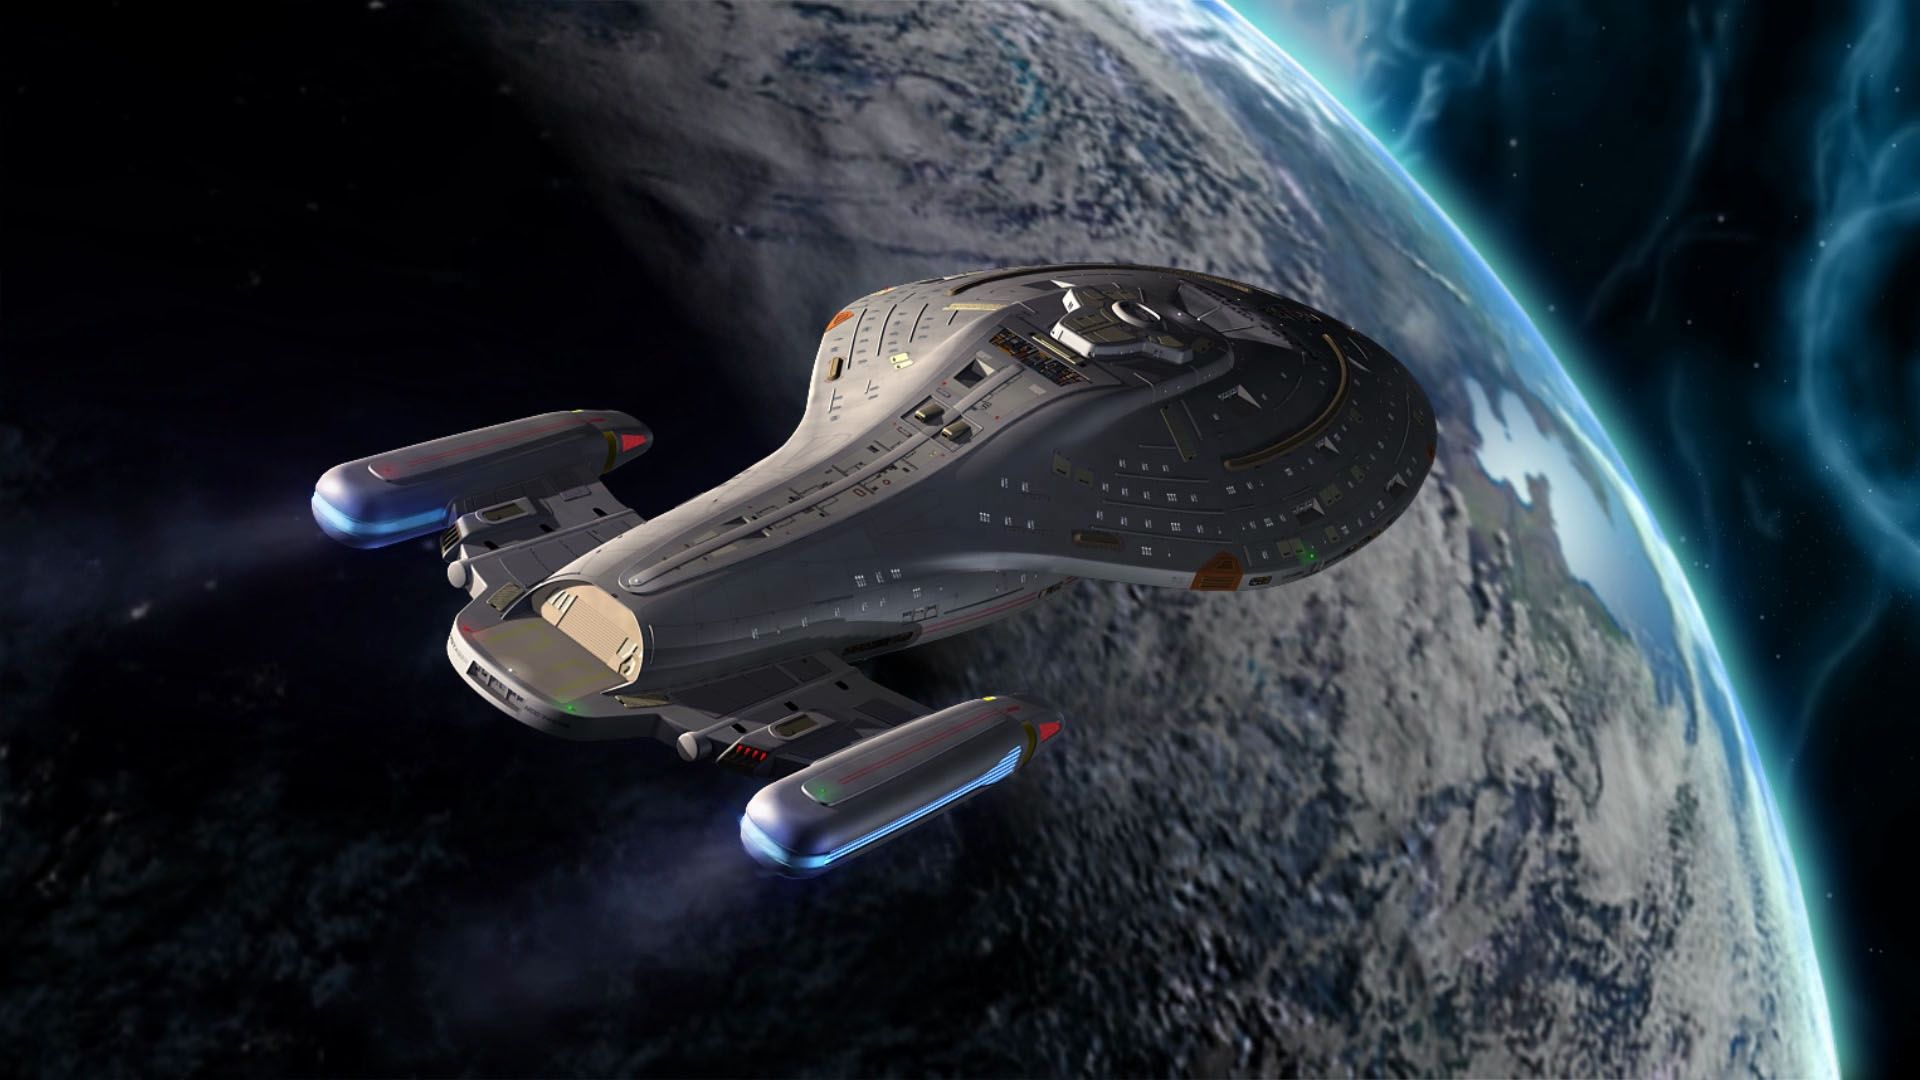 18 Star Trek: Voyager HD Wallpapers | Backgrounds - Wallpaper Abyss